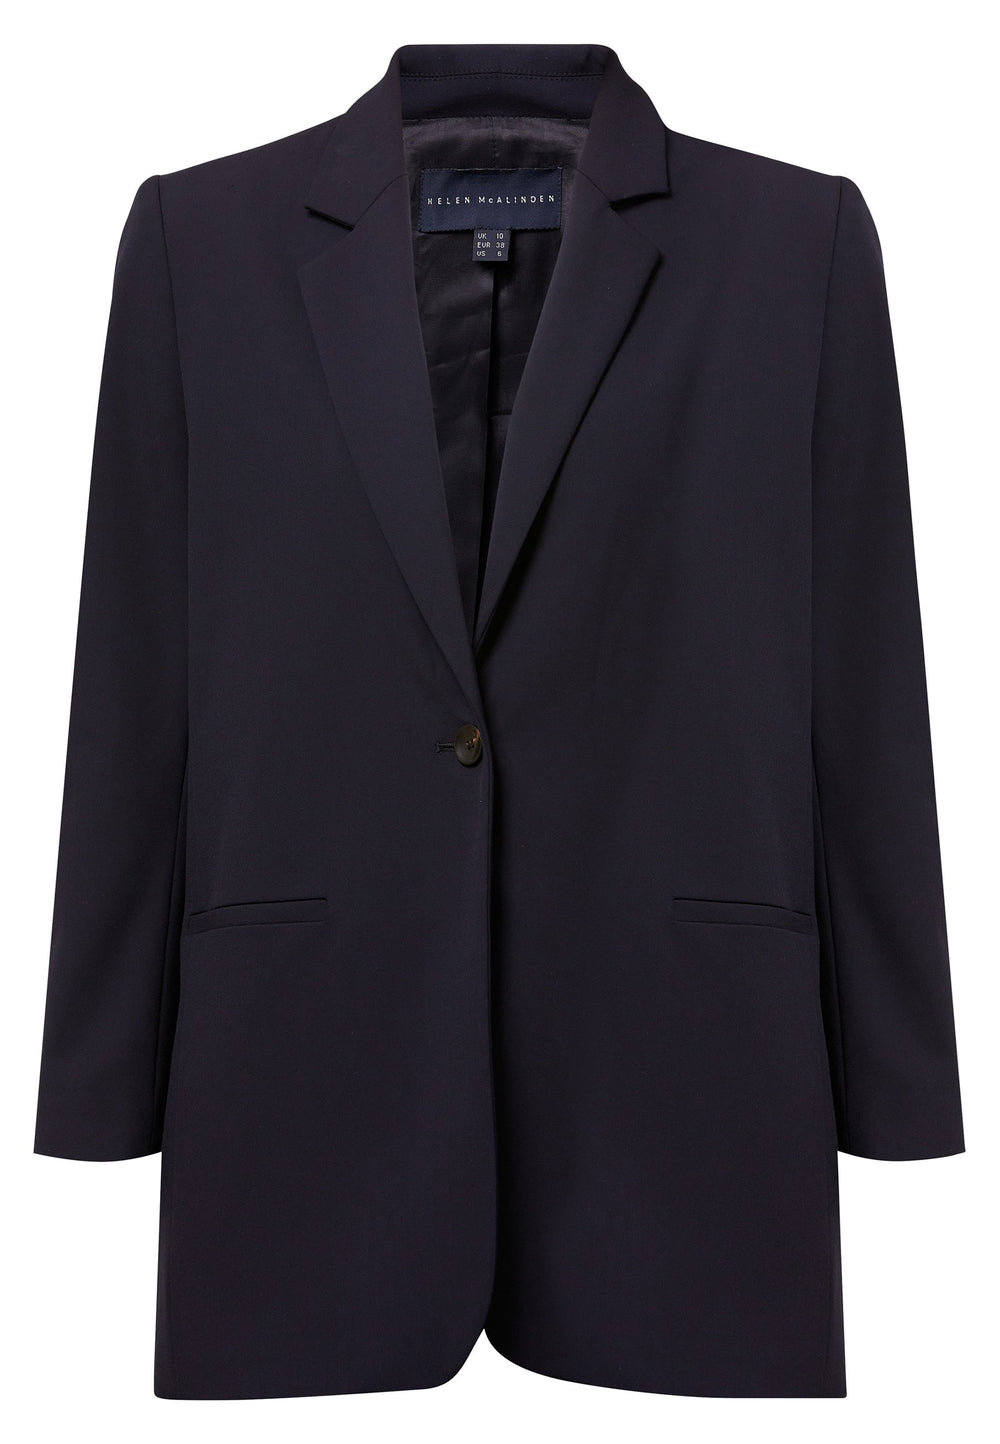 Cassie, the investment-worthy Dark Navy Boyfriend blazer. Perfectly tailored in a lightweight wool. Minimalist styling with a single button fastening. An oversized and slightly boxy silhouette. Perfect transeasonal outerwear. Team it with the co-ordinating Jill pant and the ella utility shirt for a contemporary look.